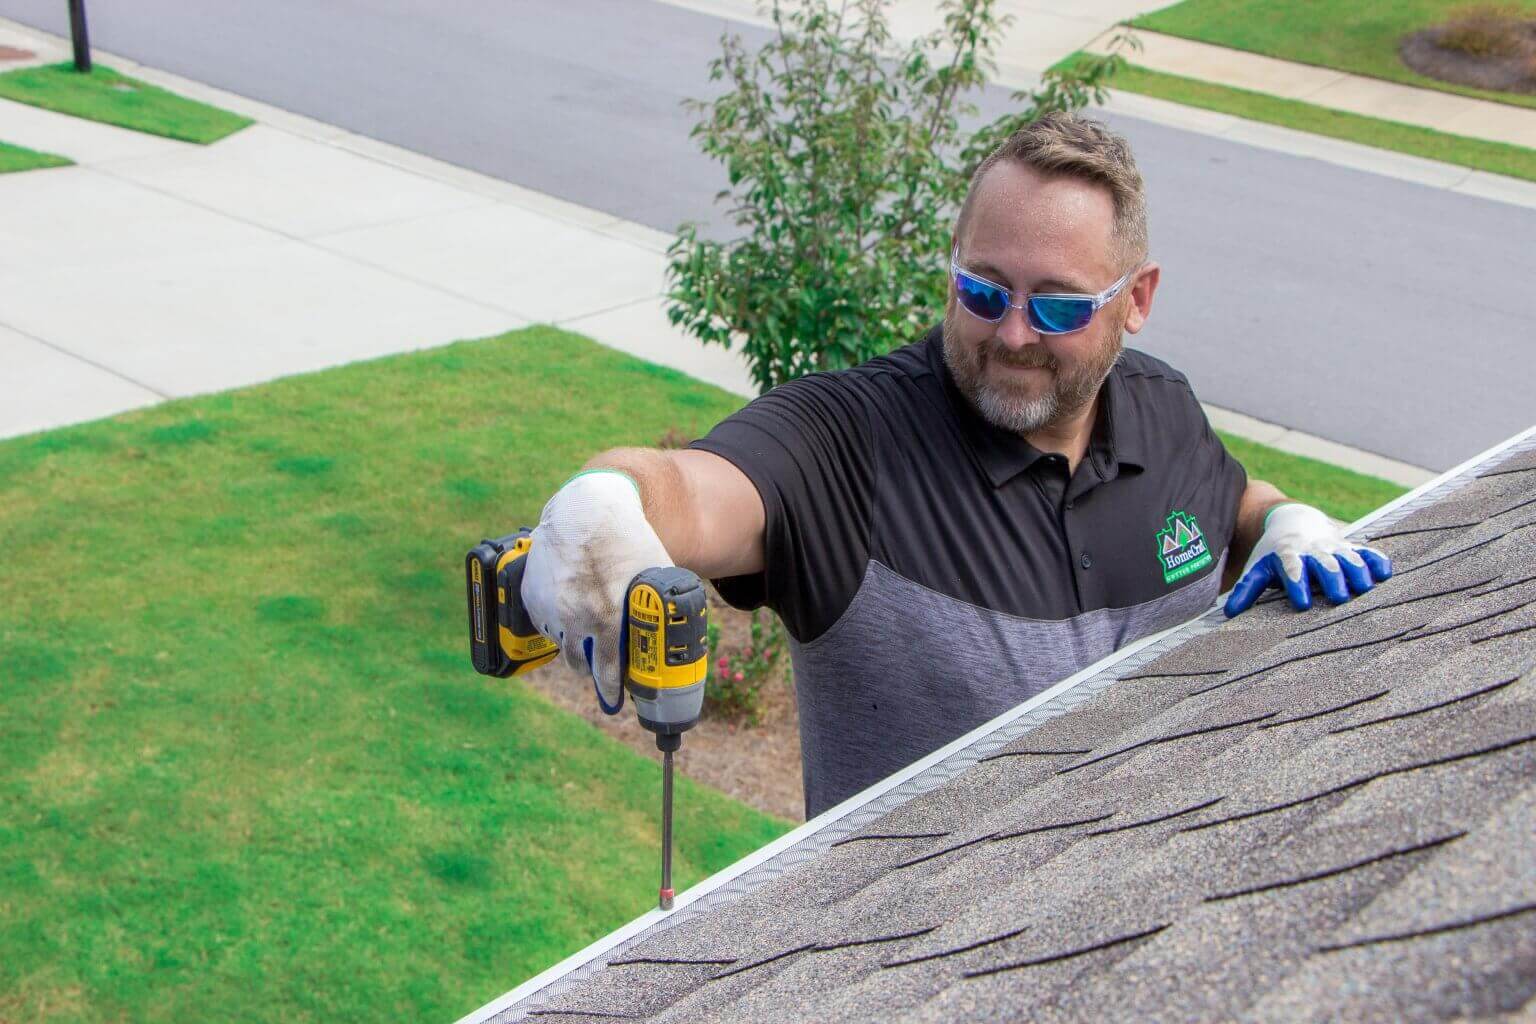 Best Gutter Guards in Polkton, NC